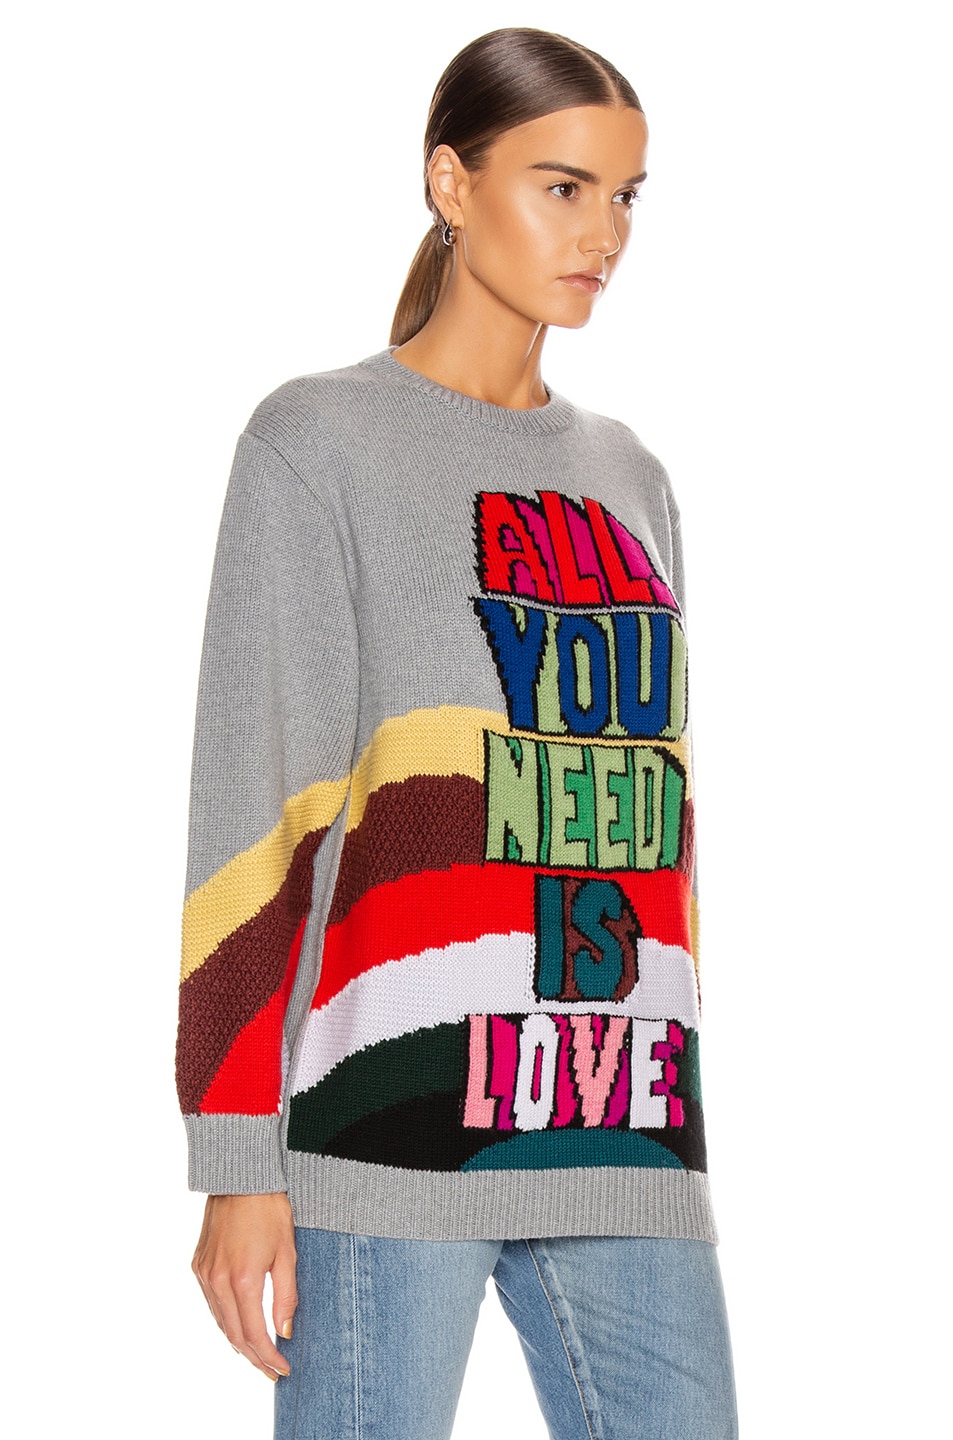 Stella McCartney All You Need Is Love Sweater in Grey Multicolor | FWRD